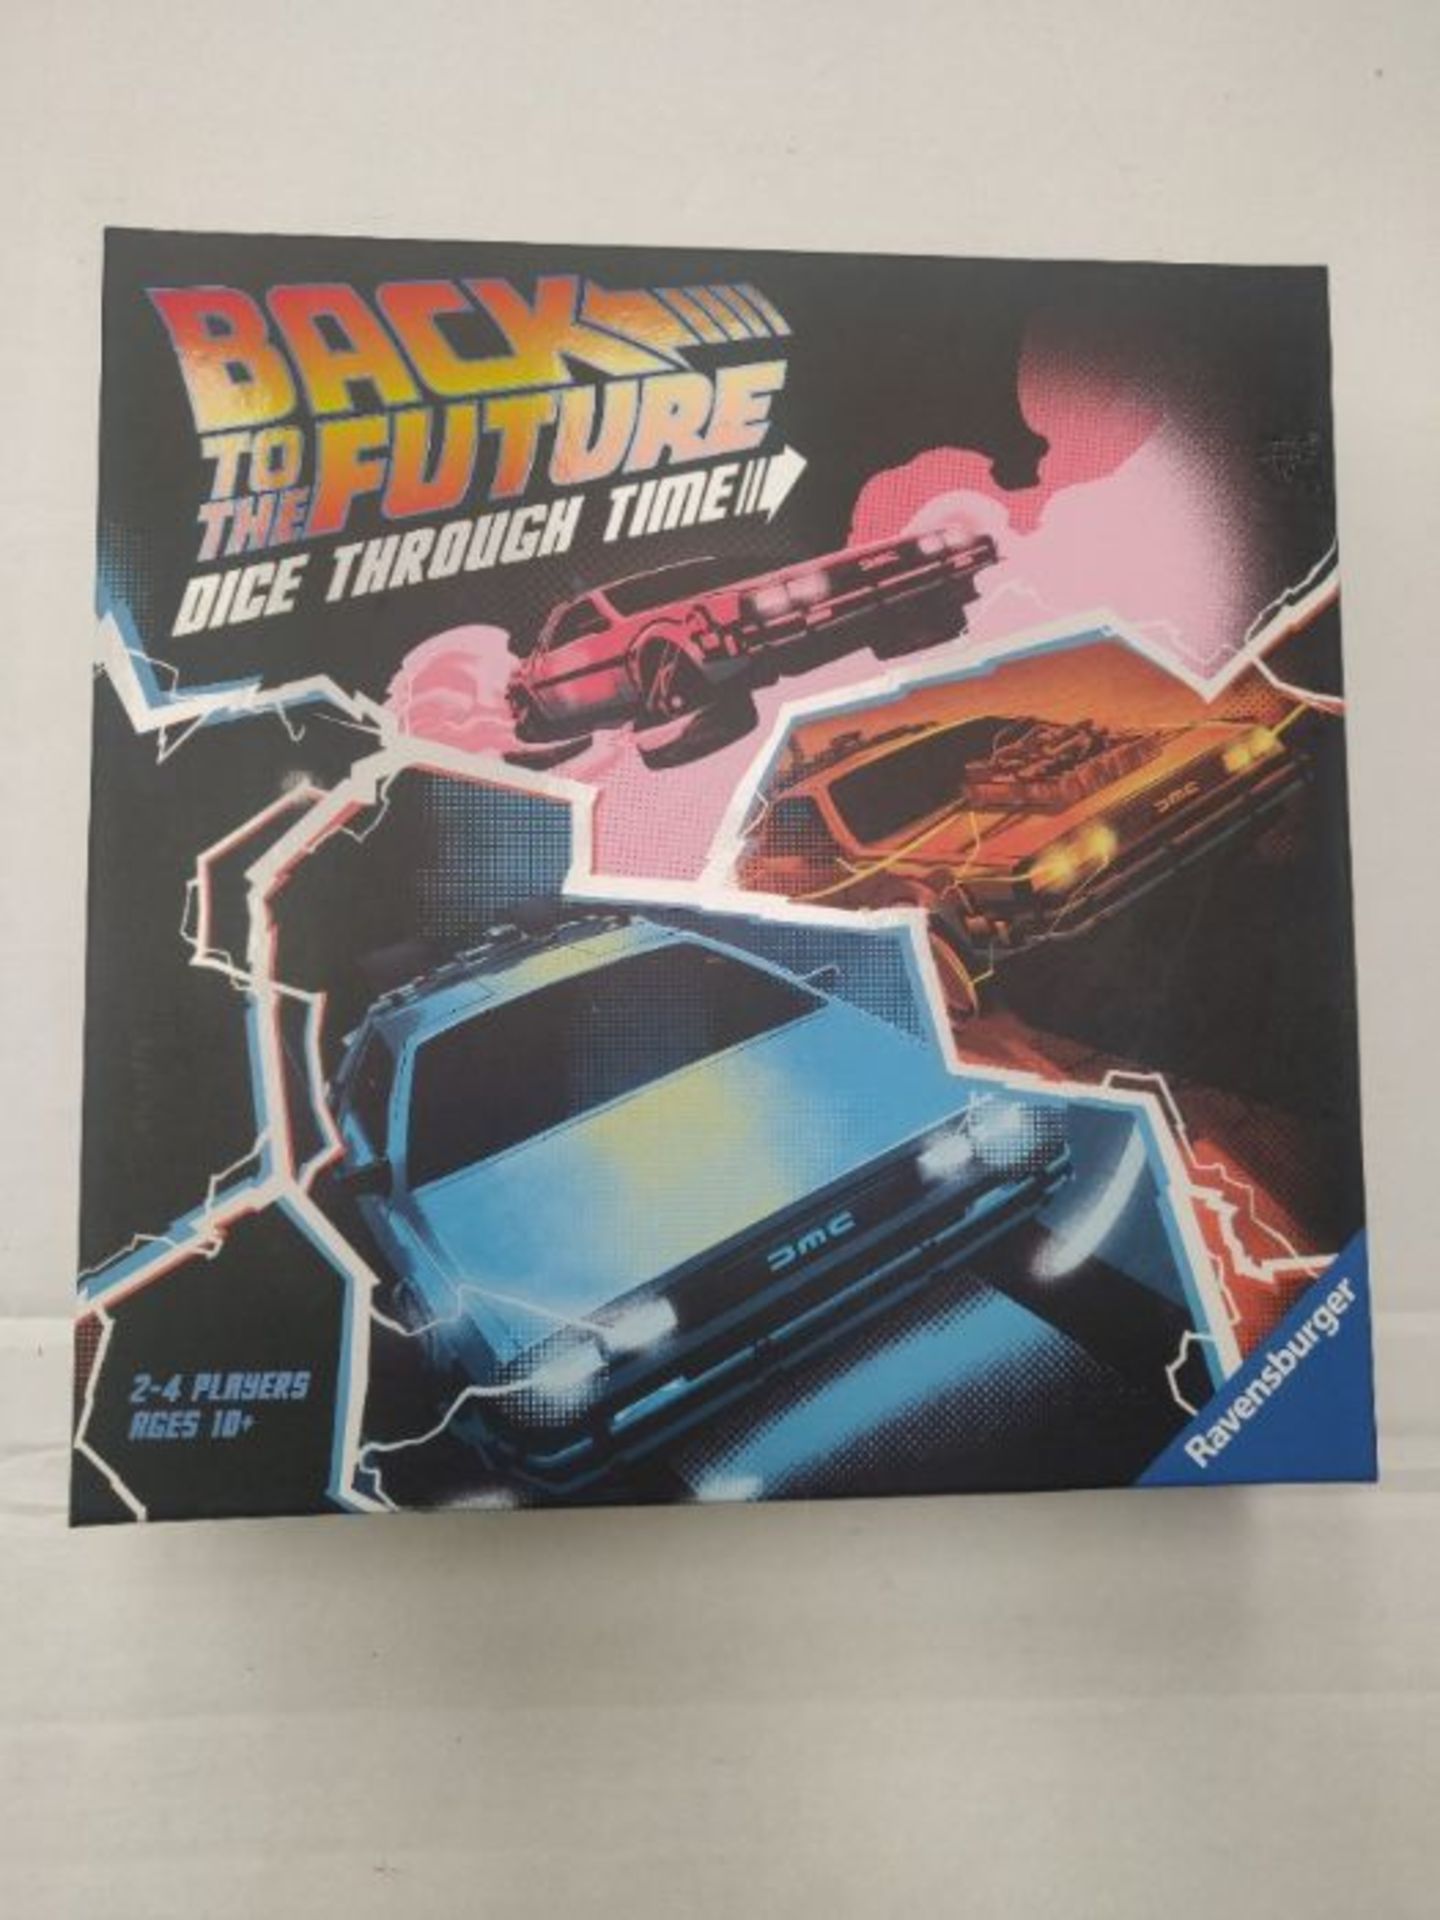 Ravensburger Back to The Future Board Game for Adults and Kids Age 10 and Up - Dice Th - Image 2 of 3